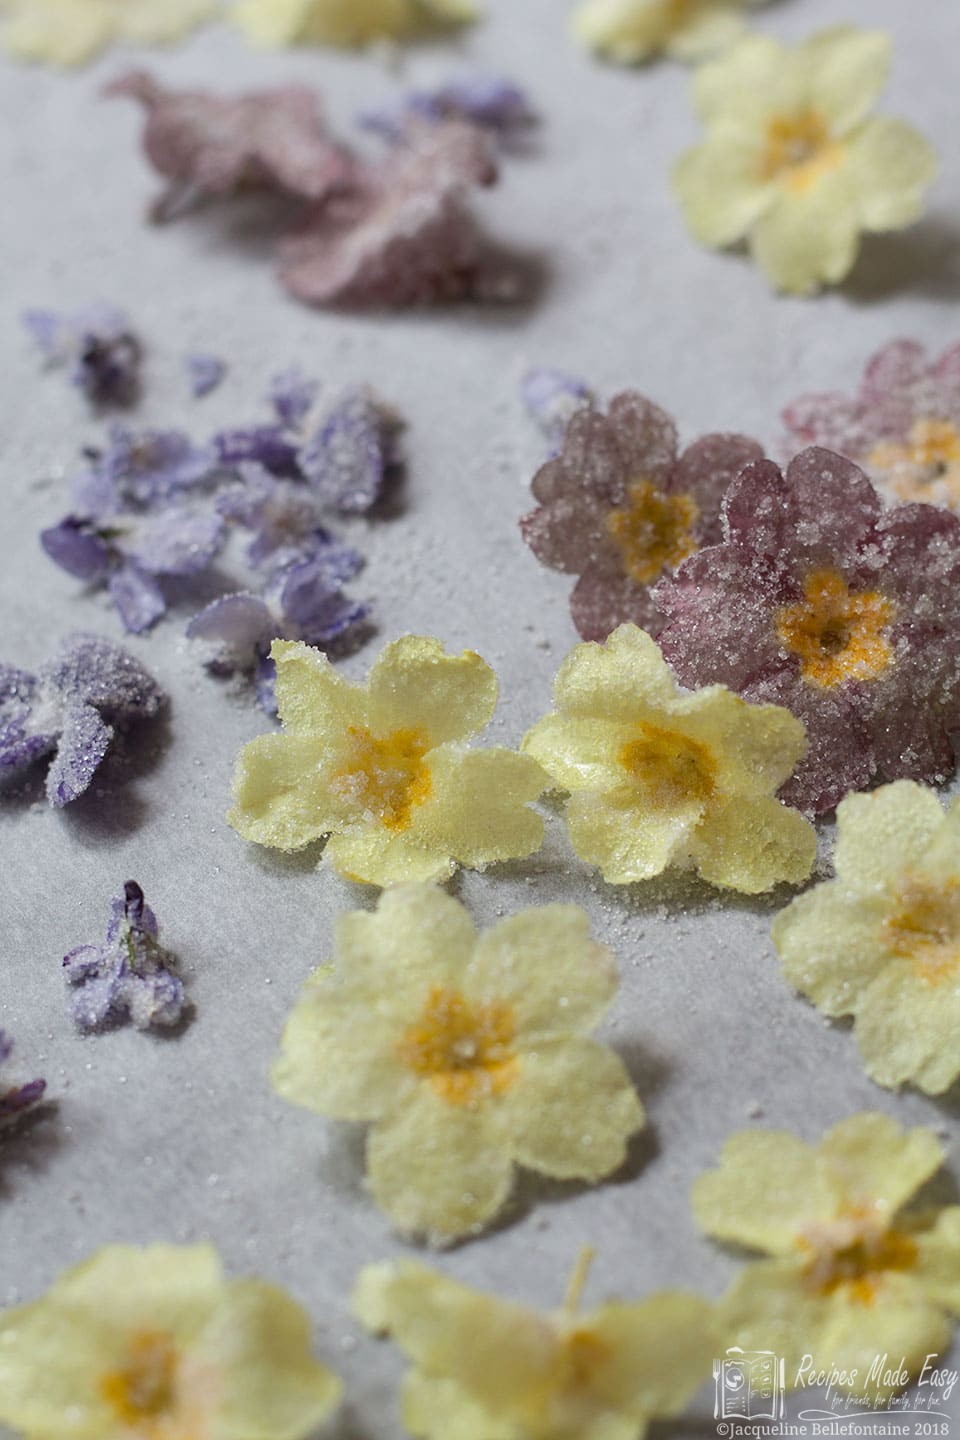 How to crystalise flowers, by Recipes Made Easy